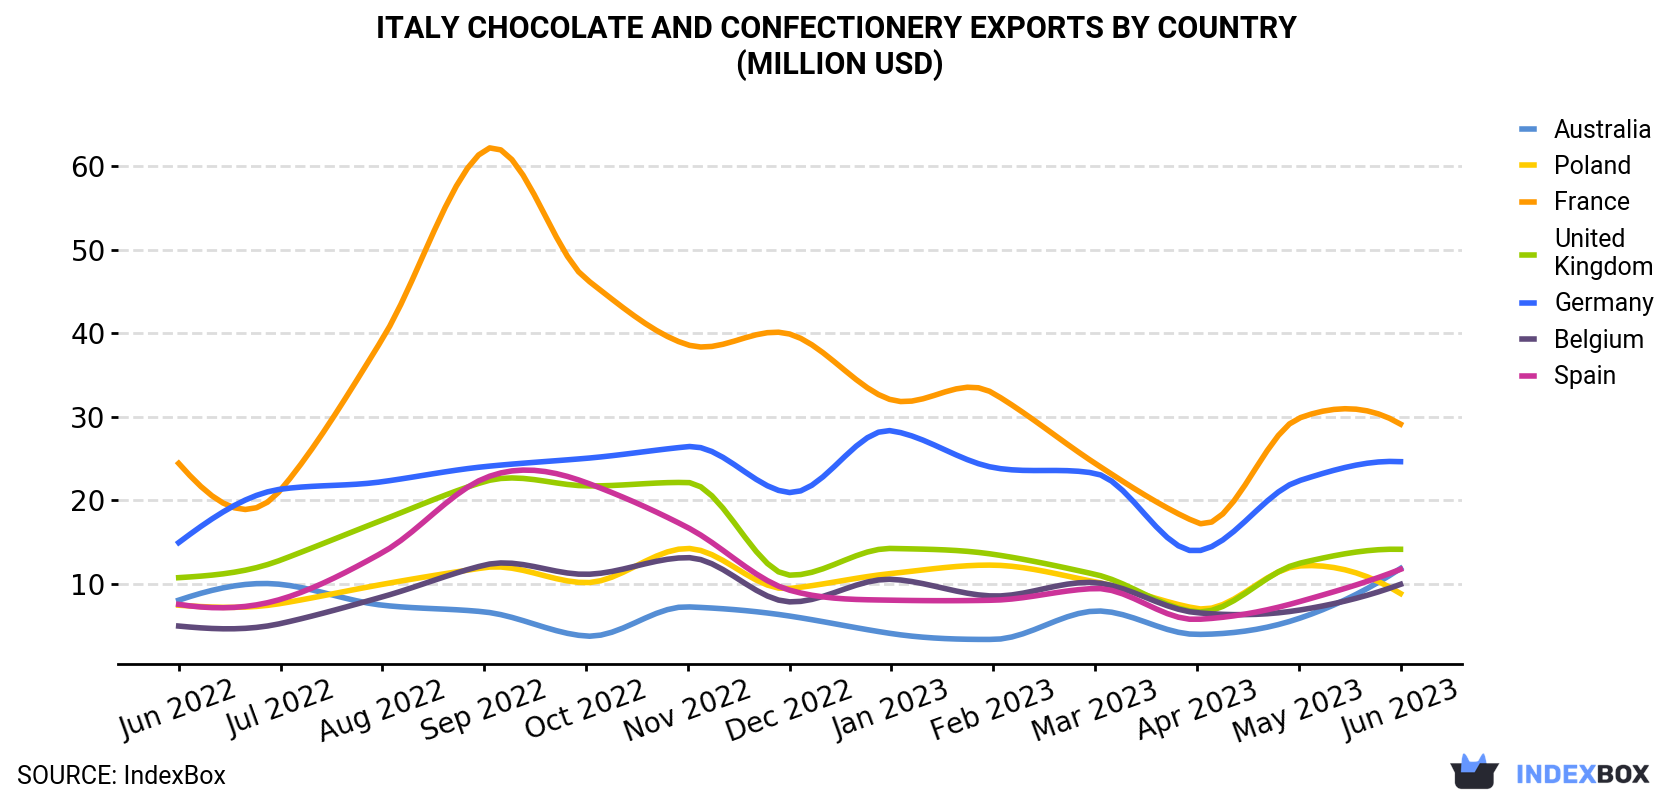 Italy Chocolate And Confectionery Exports By Country (Million USD)